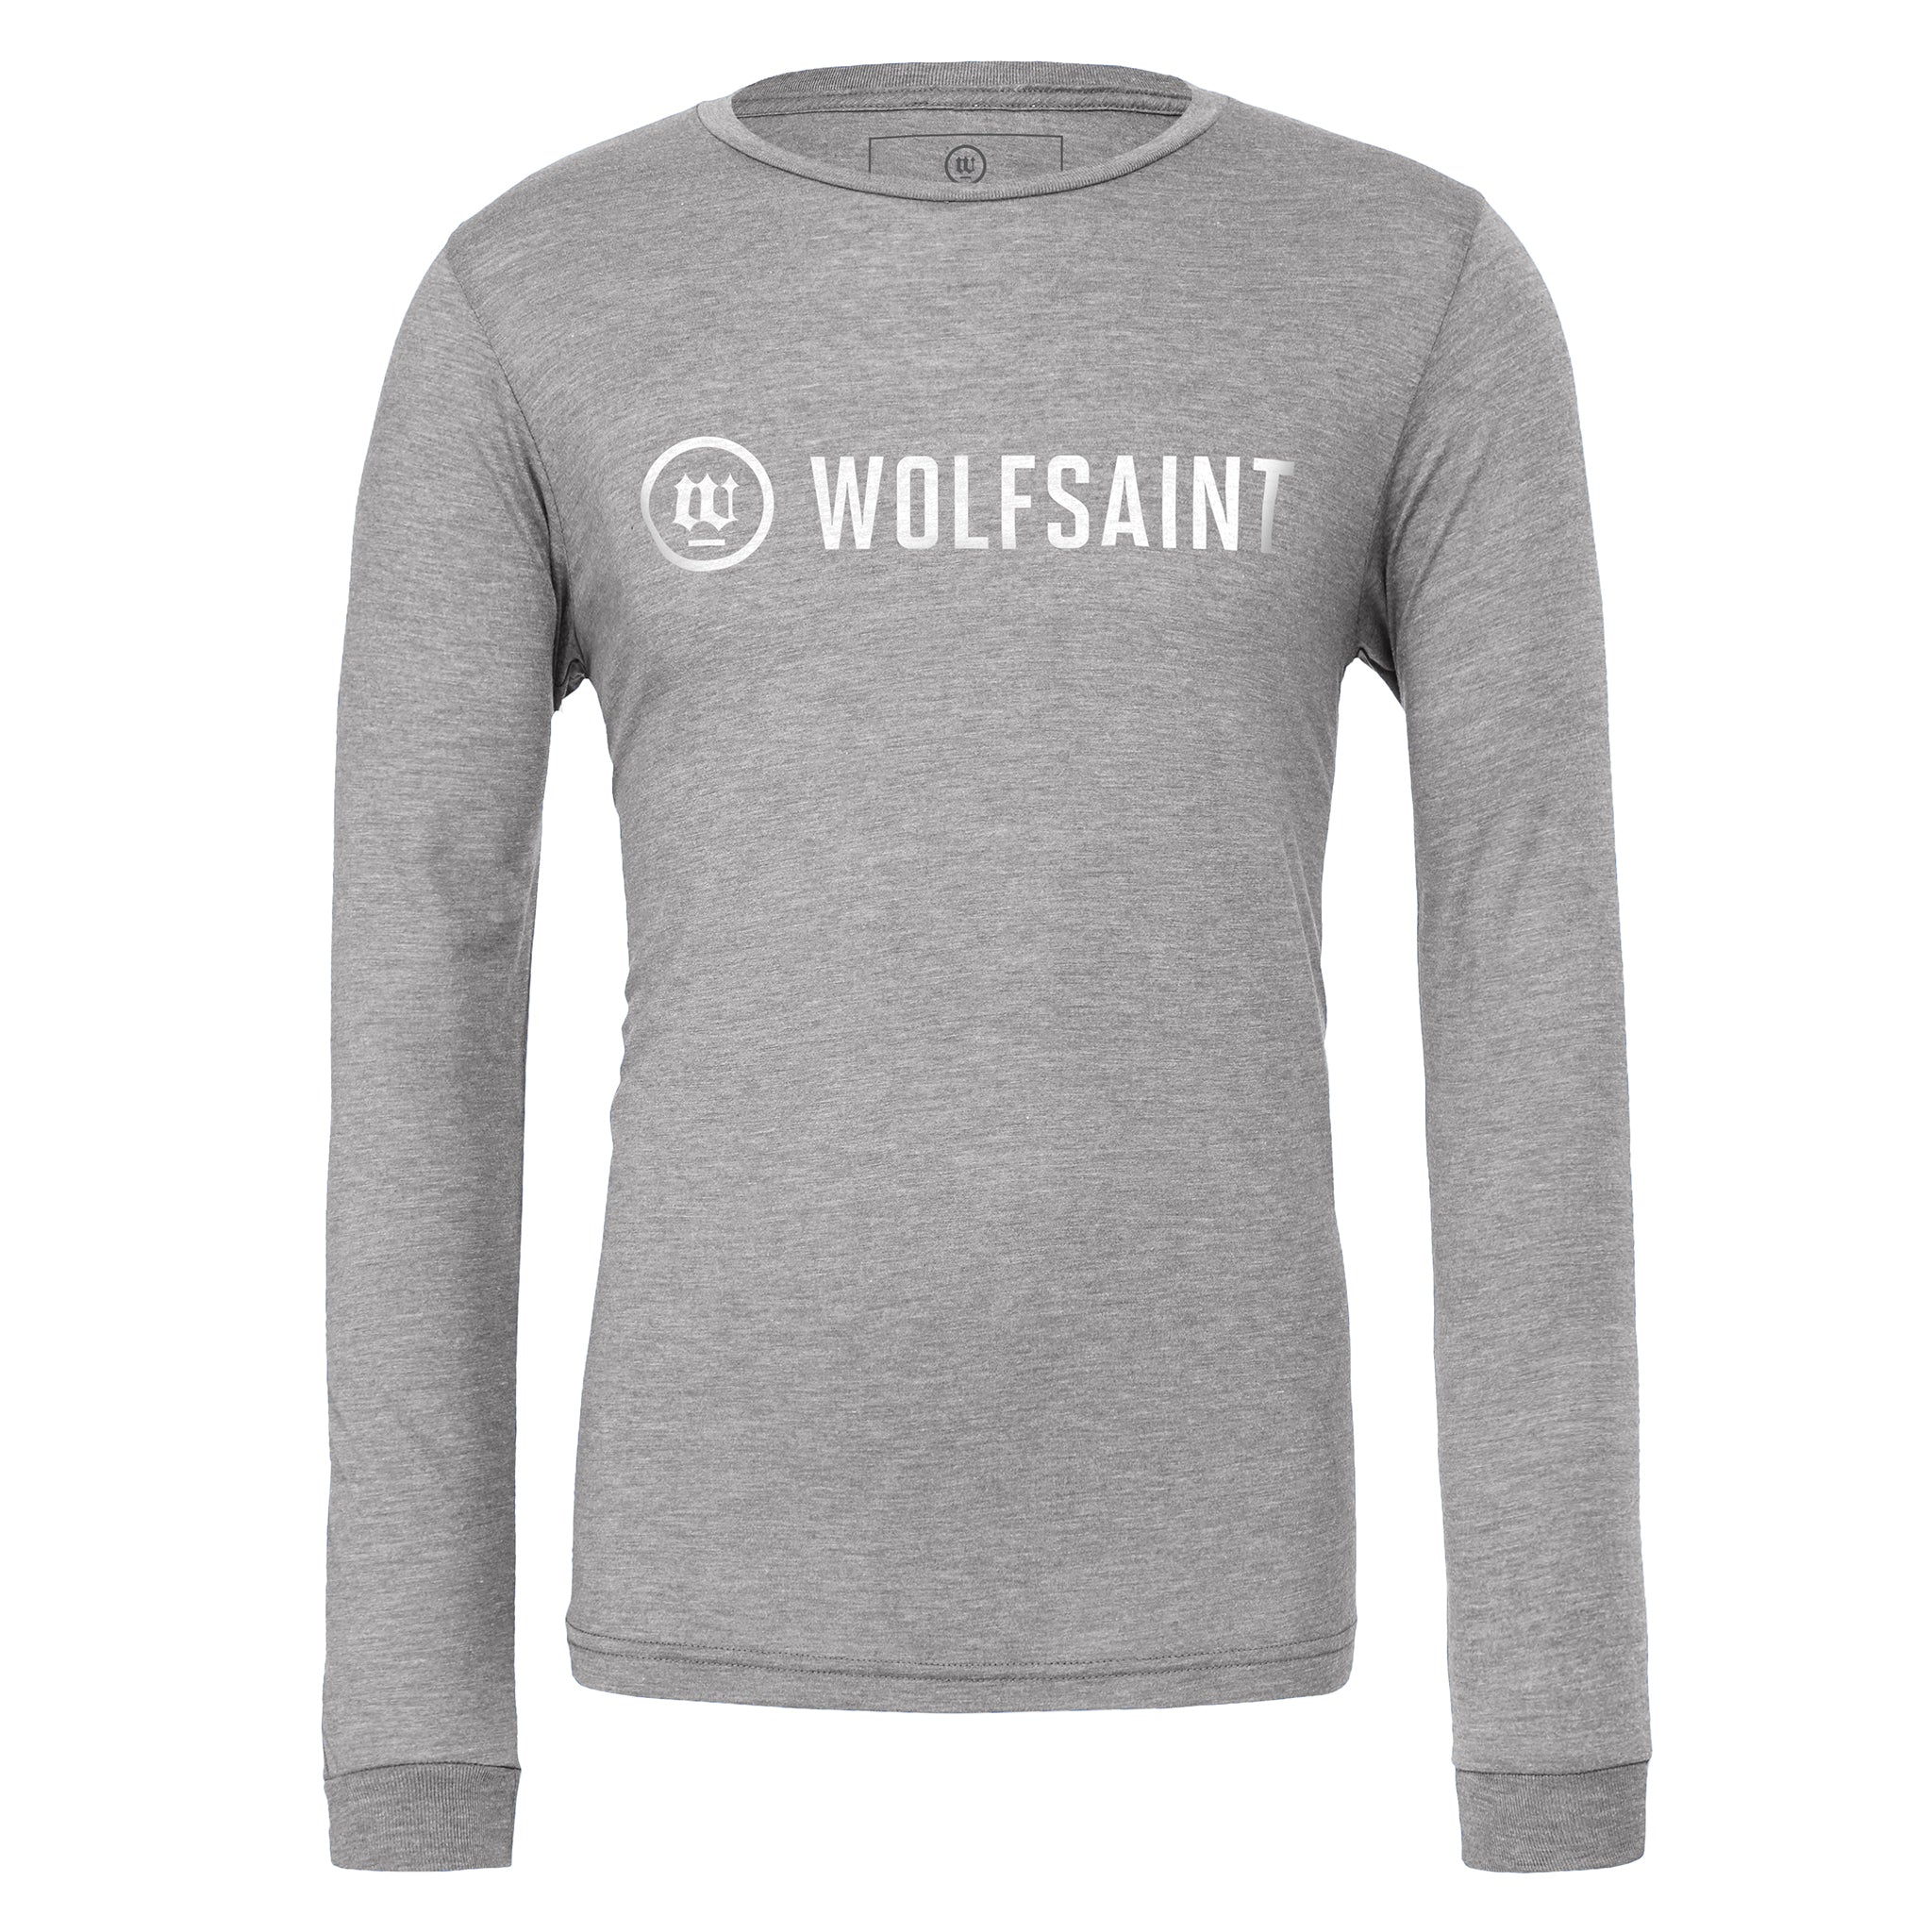 A simple, elegant unisex long sleeved t-shirt in Athletic Heather Gray, with the fashionable WOLFSAINT logo branding across the chest in white. From Wolfsaint.net